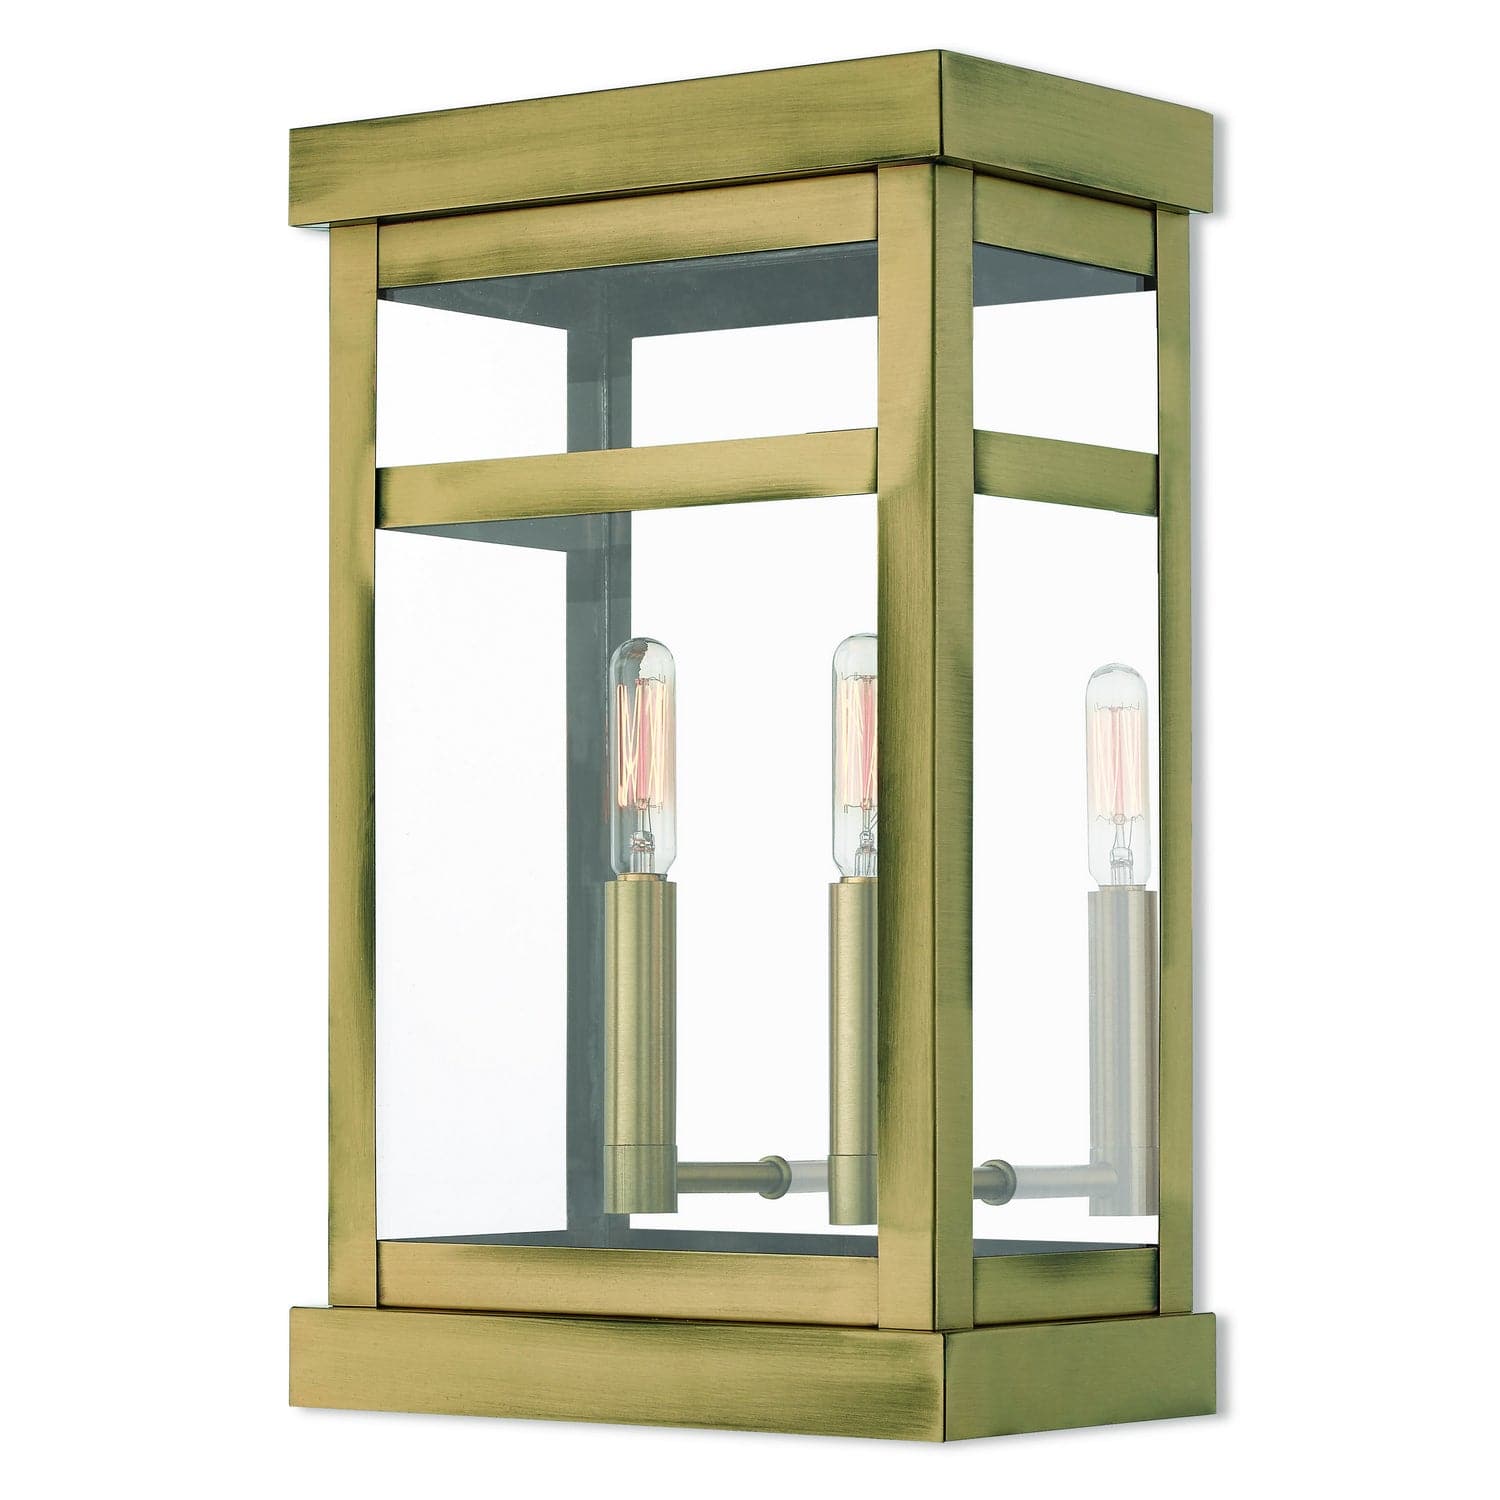 Livex Lighting - 20705-01 - Two Light Outdoor Wall Lantern - Hopewell - Antique Brass w/ Polished Chrome Stainless Steel